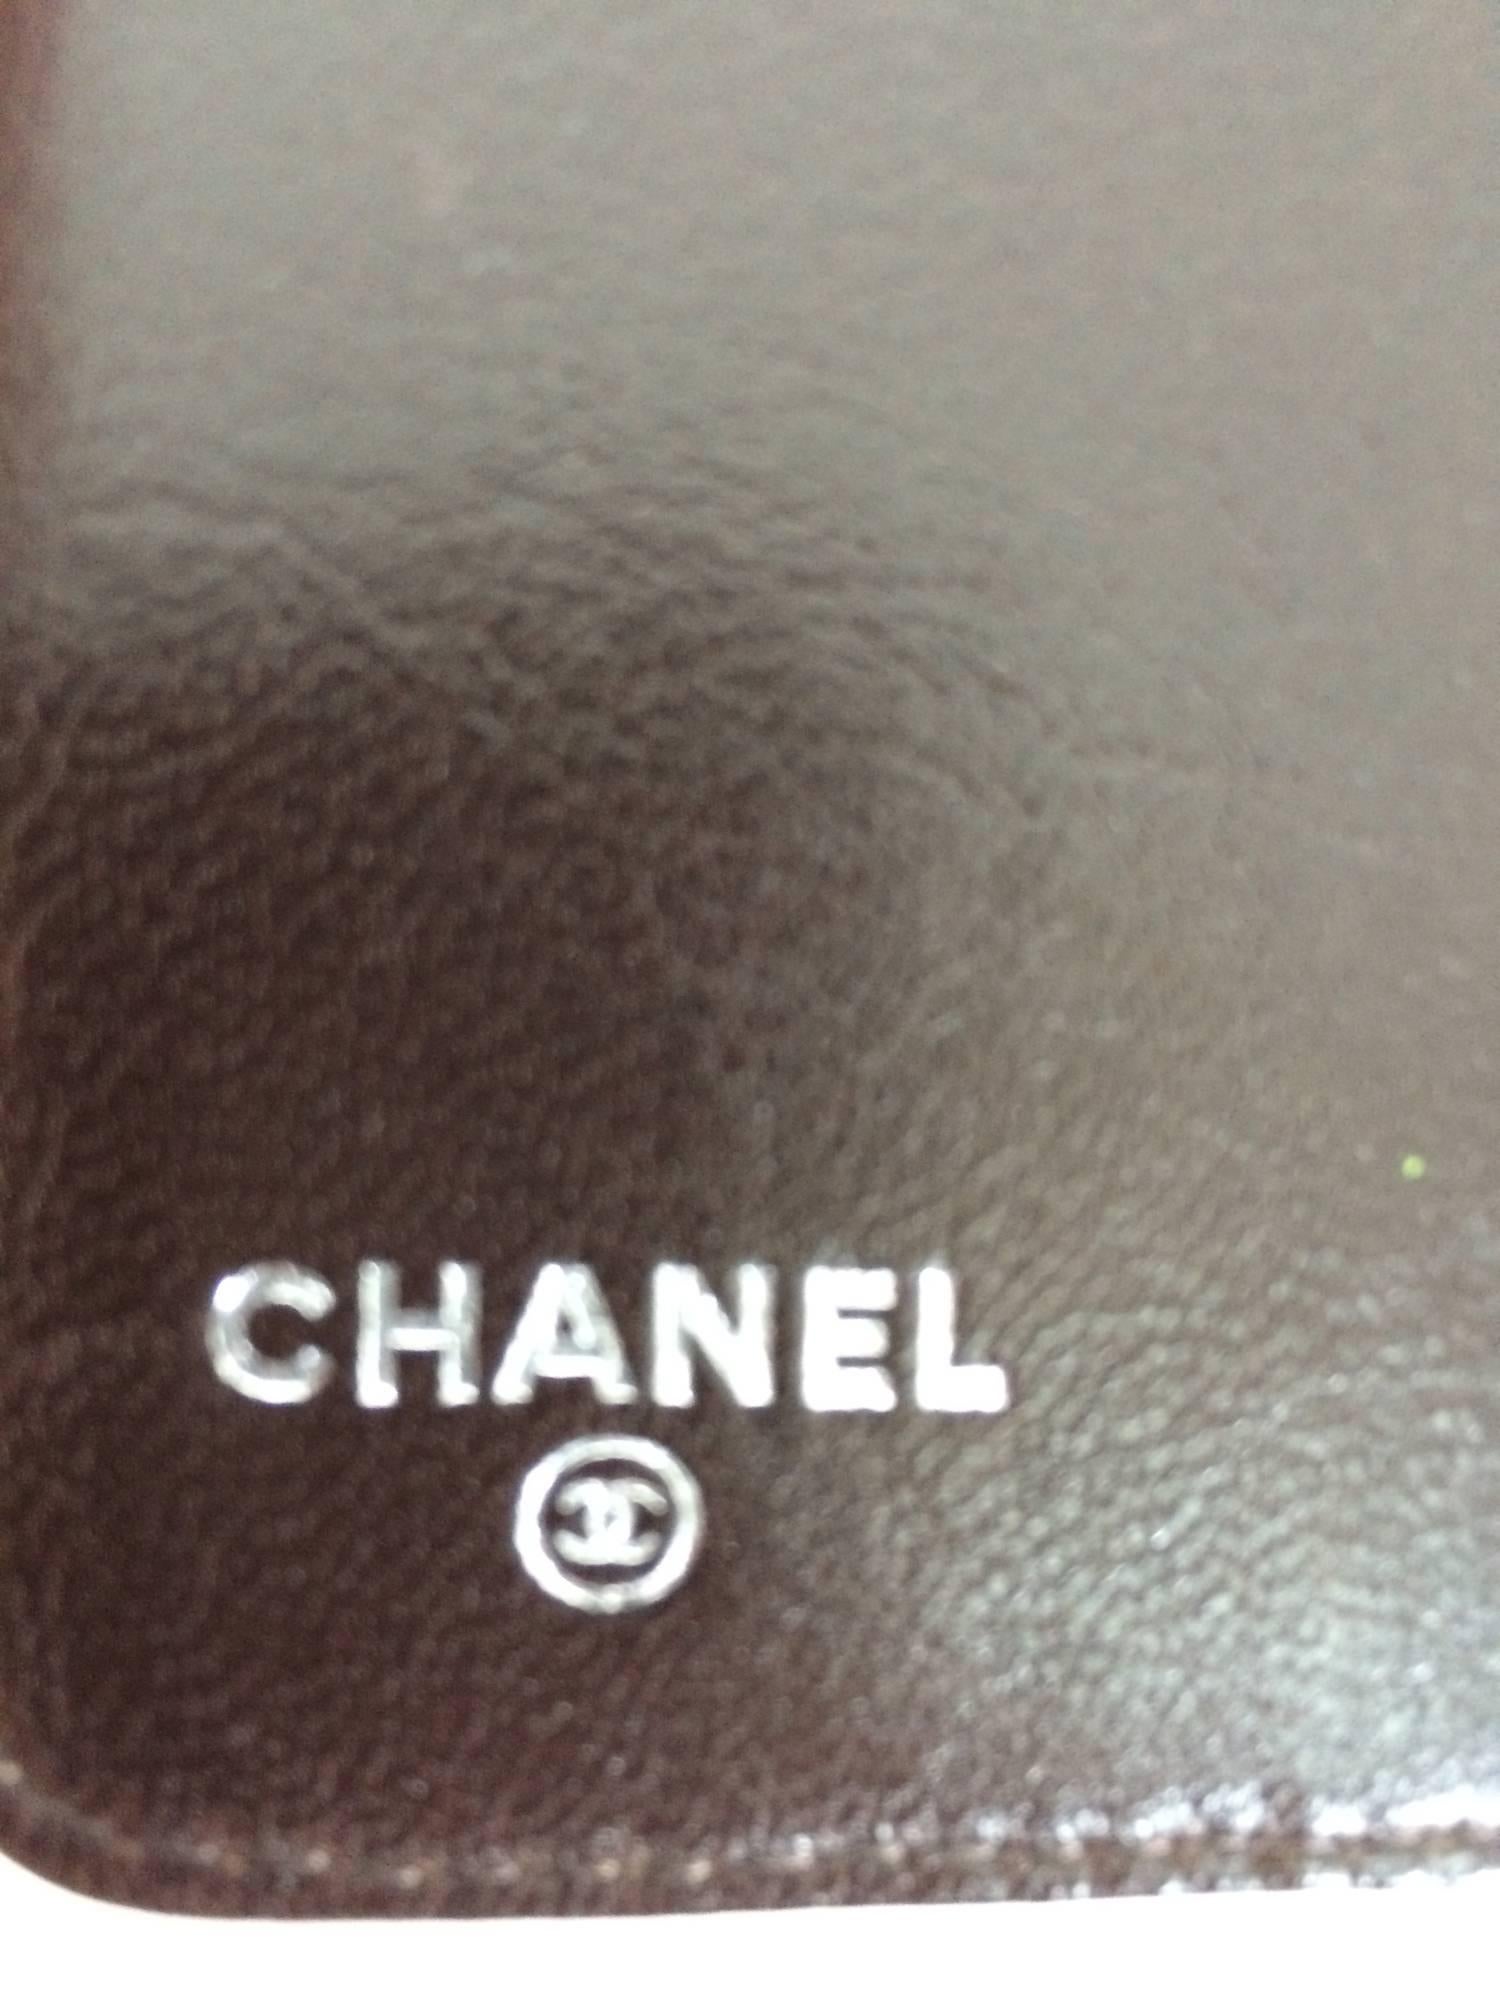 Chanel quilted leather datebook 2009 unused  2